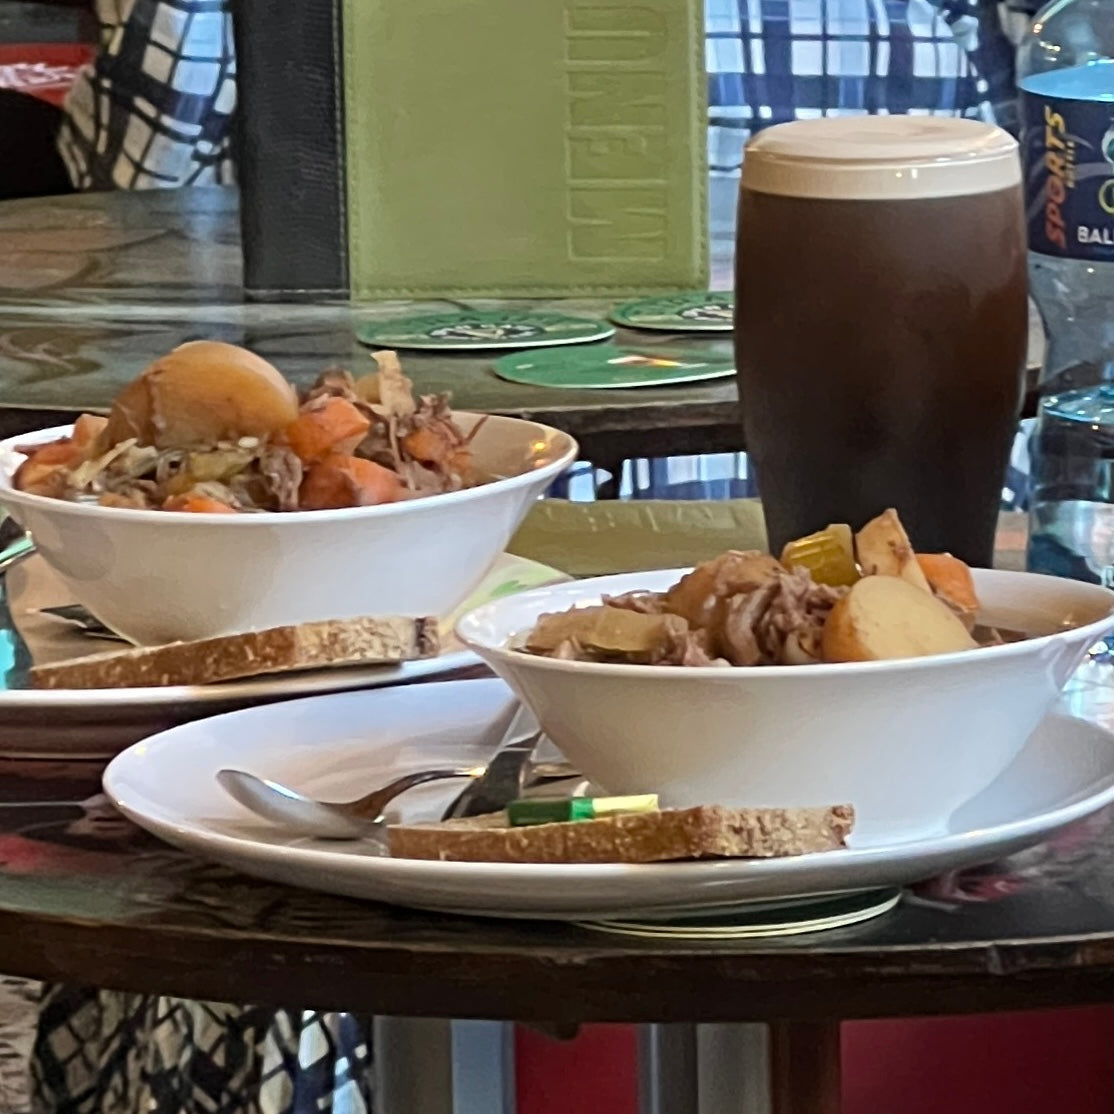 A stew and a Guinness